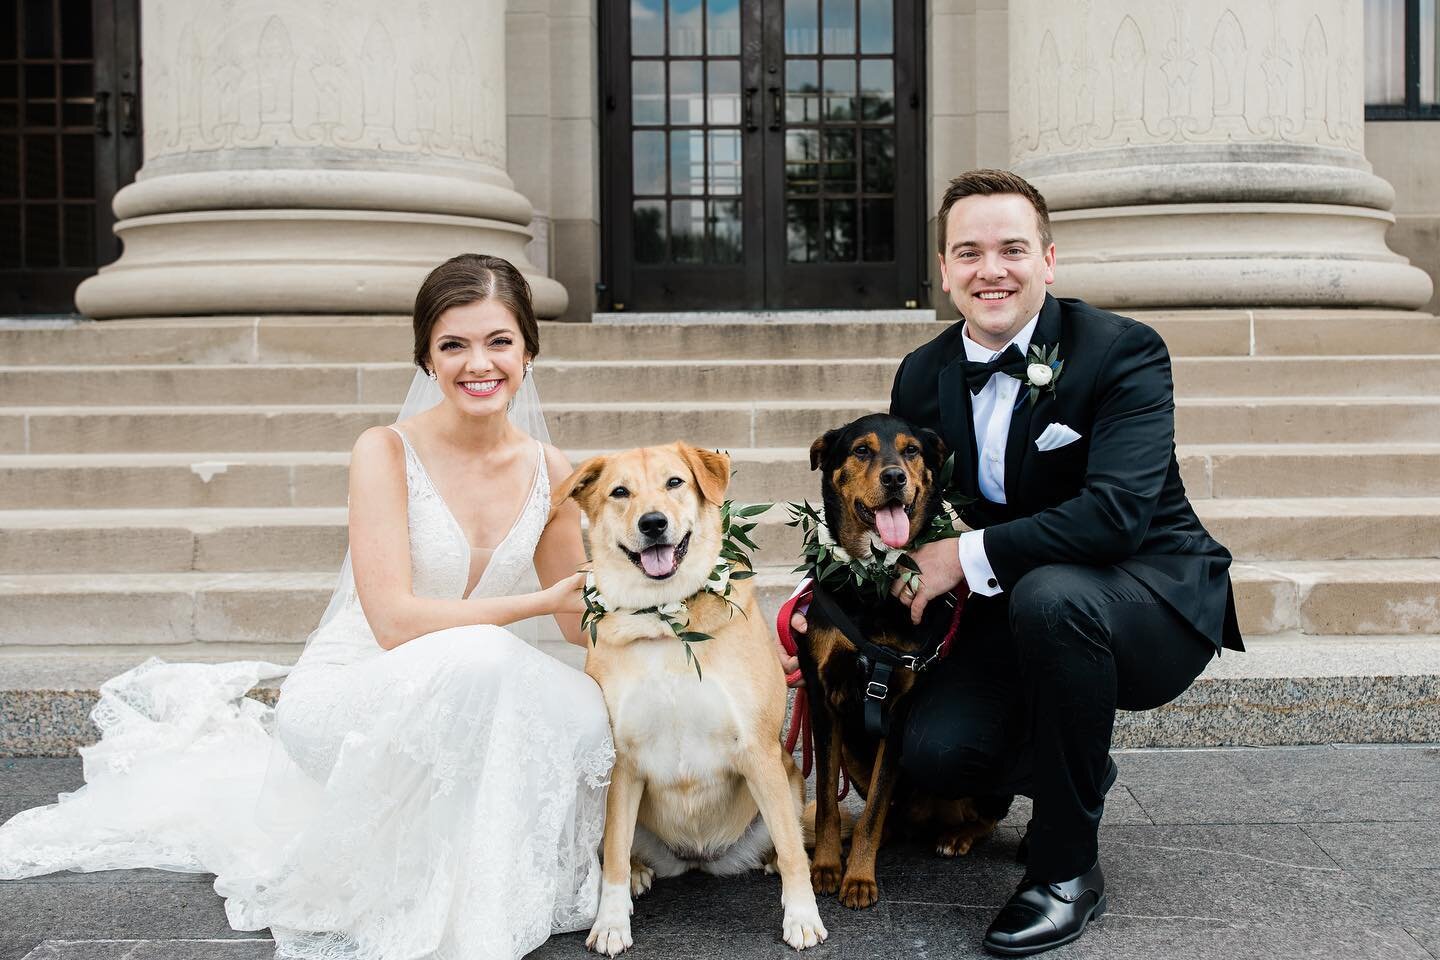 These puppies loved seeing their mommy and daddy getting married!!! And a super big thanks to the couple&rsquo;s bestie for being their chauffeur 😉
.
.
.
.
#kcwedding #newlyweds #loveourclients #celebrationsoflove #celebrationsoflovekc #weddingplann